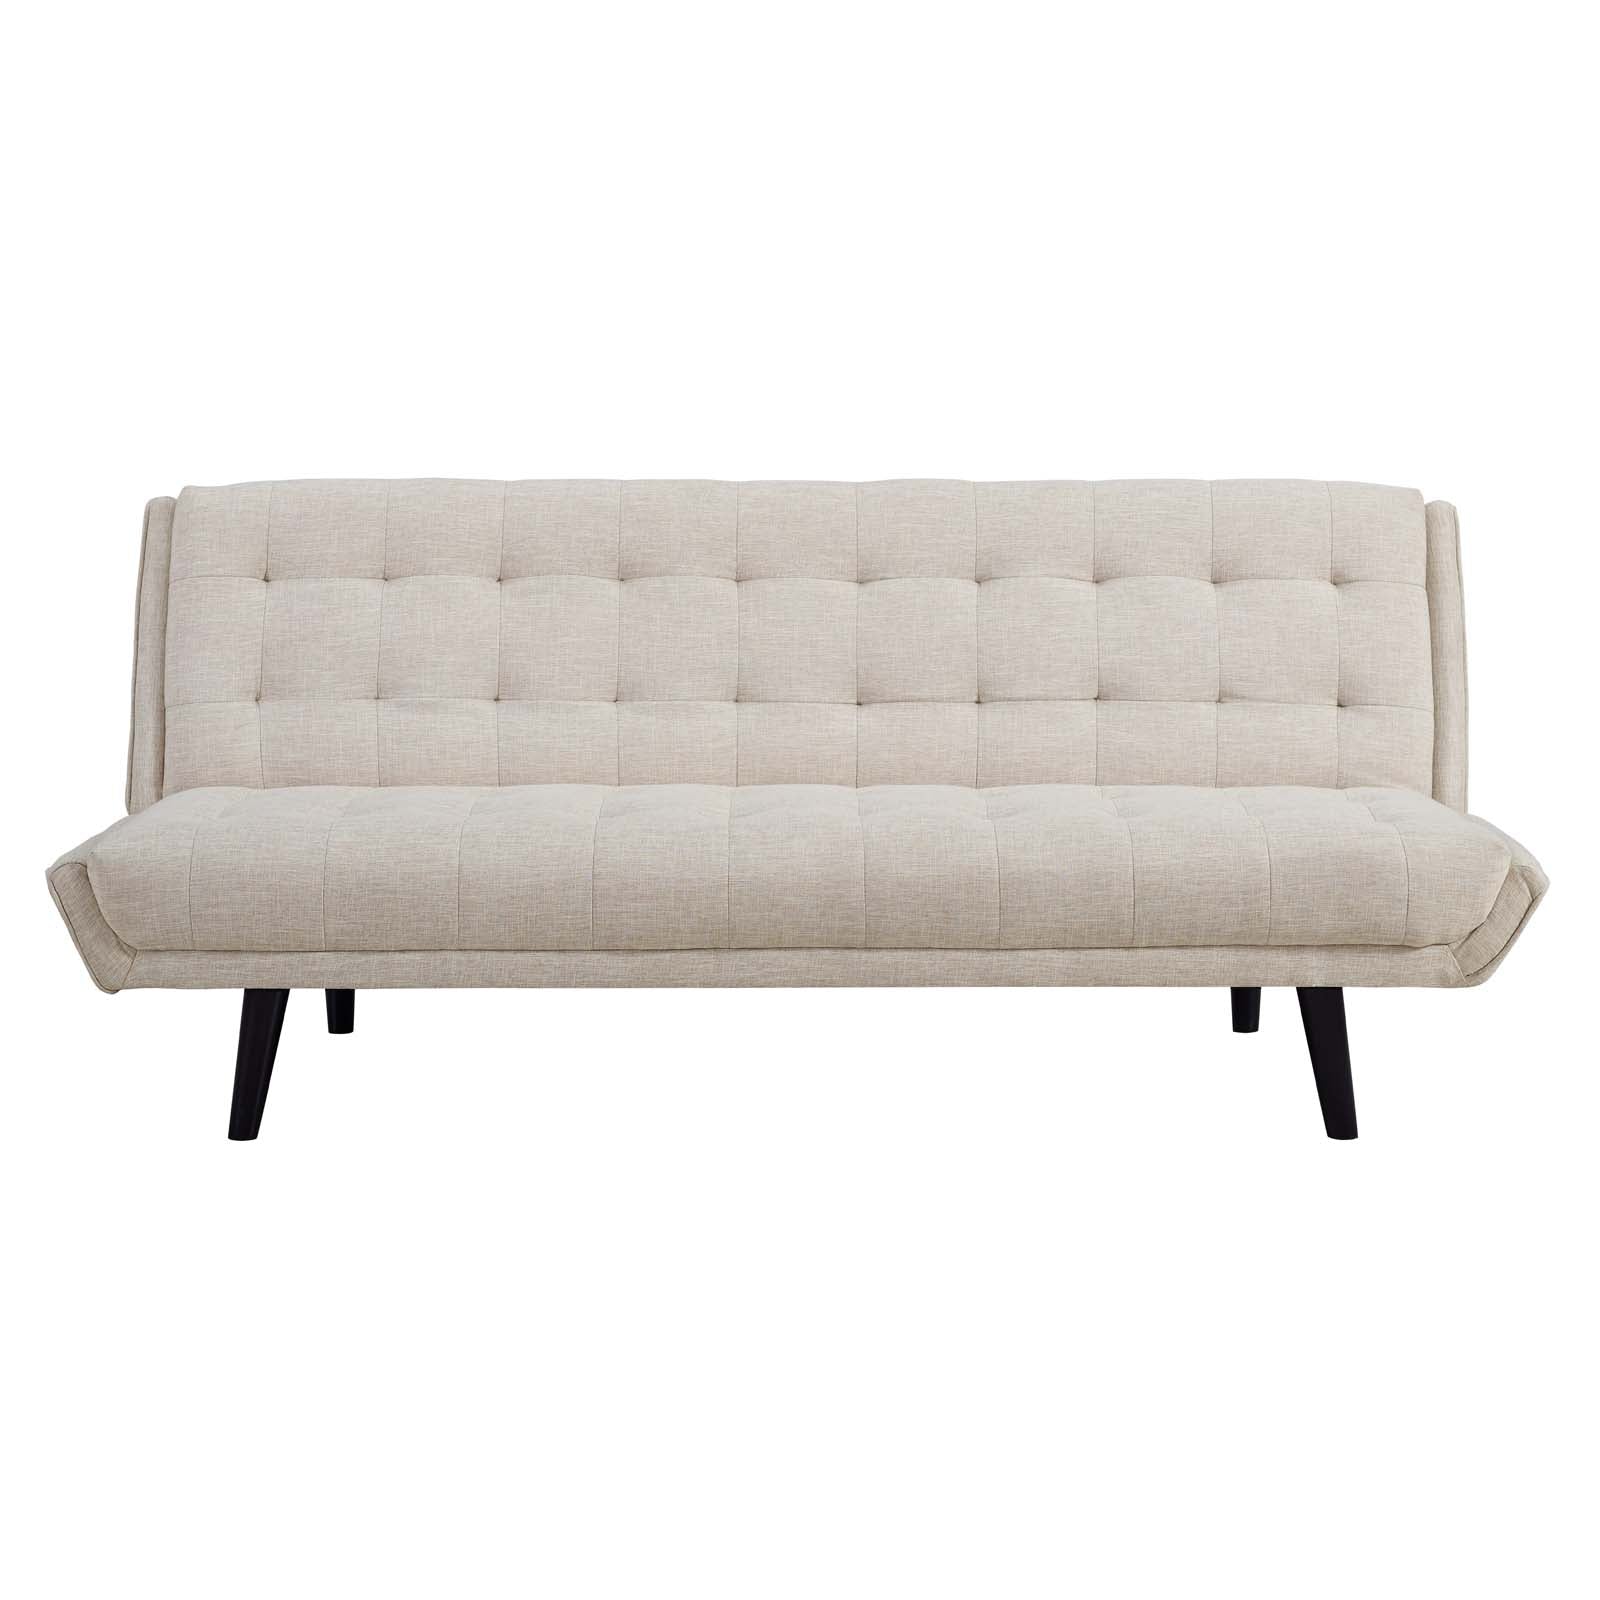 Modway Sofas & Couches - Glance Tufted Convertible Fabric Sofa Bed Beige